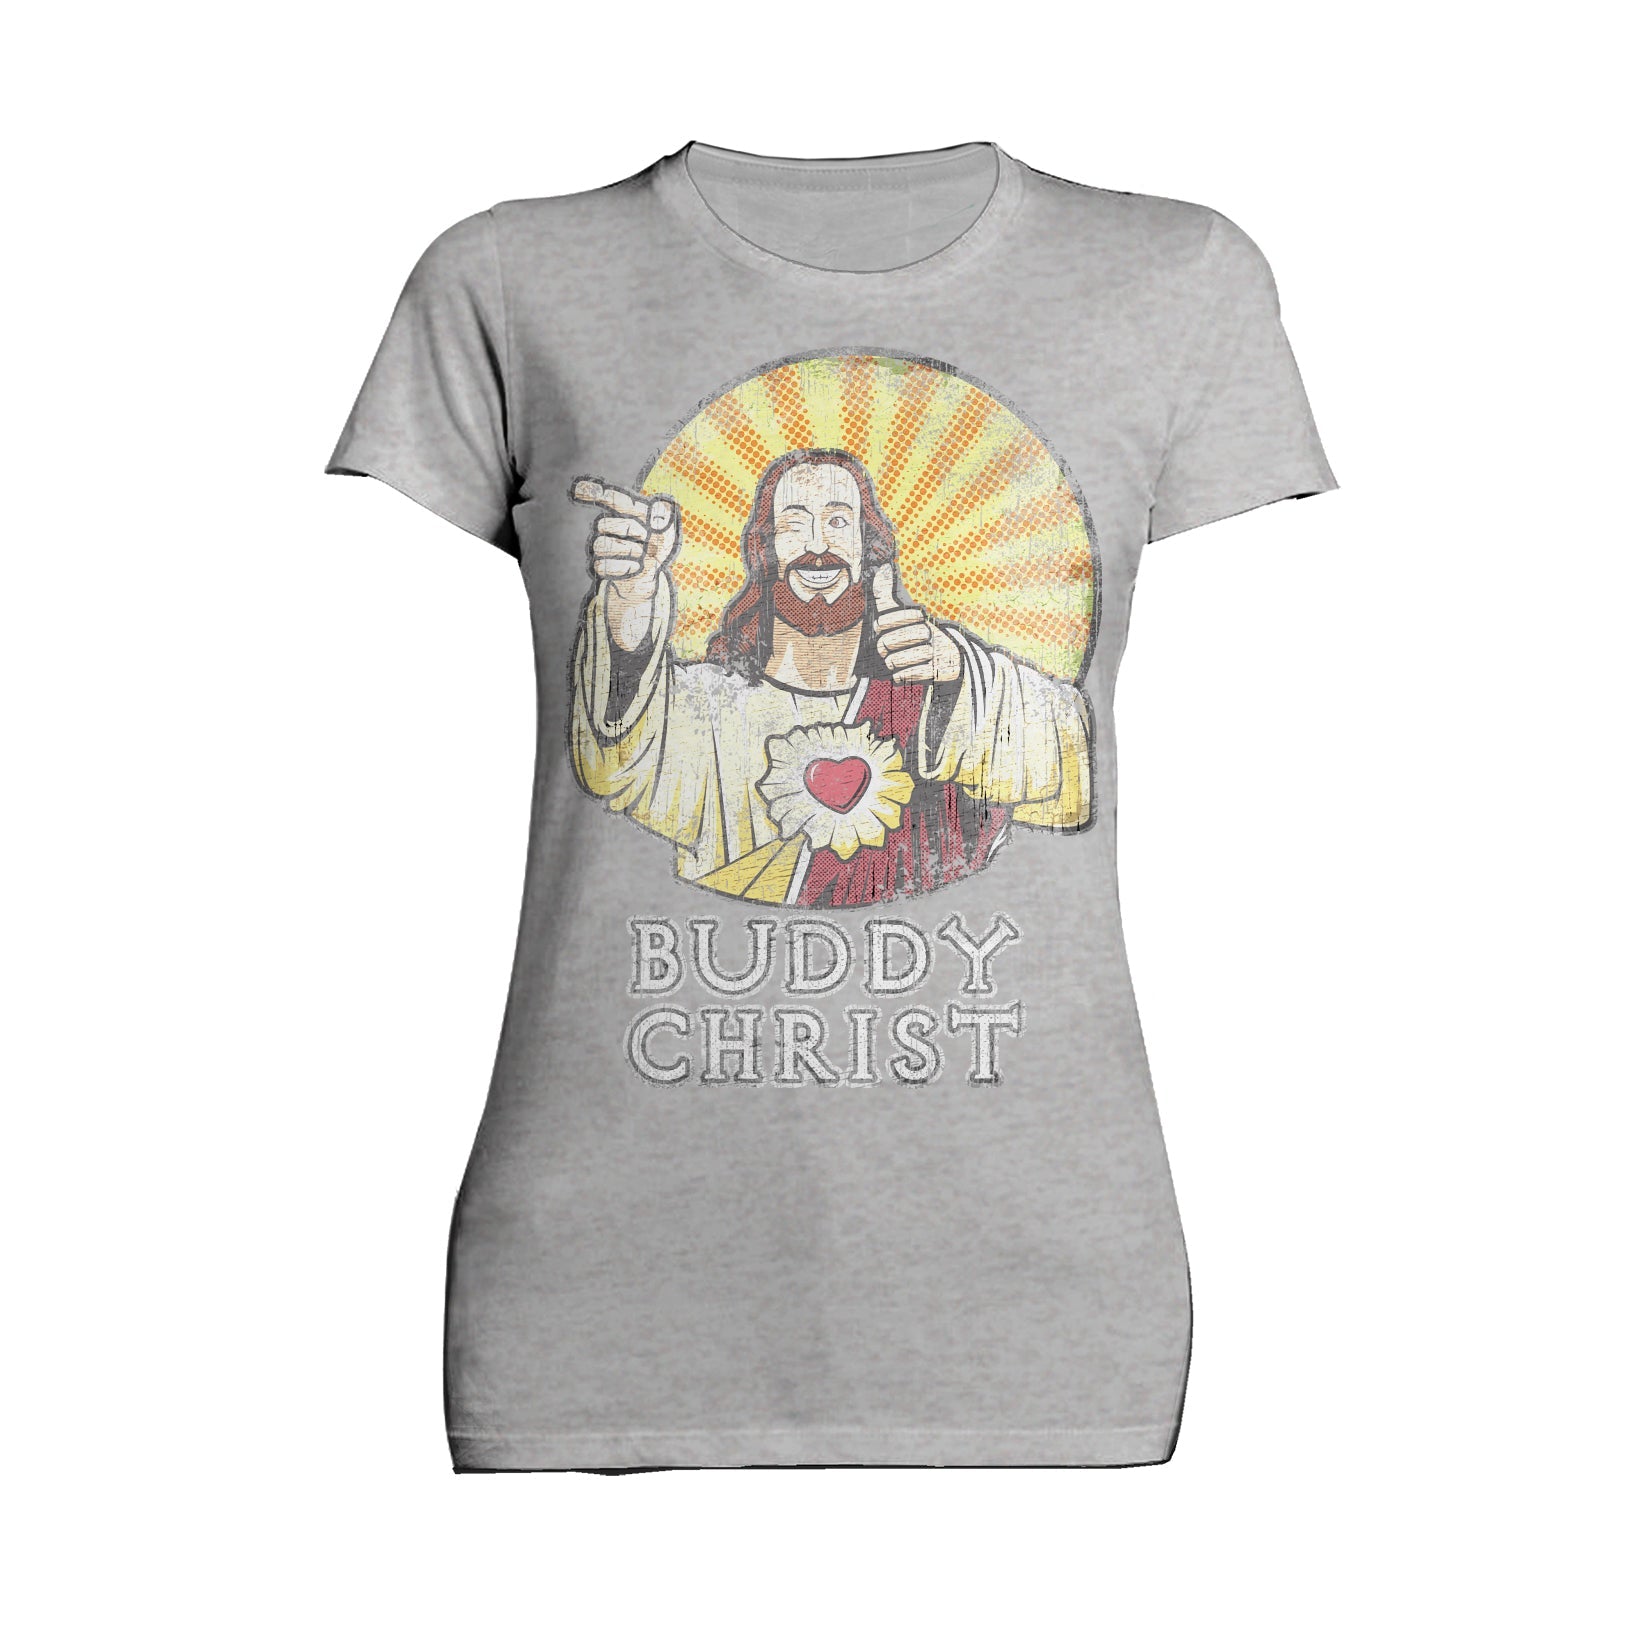 Kevin Smith View Askewniverse Buddy Christ Got Summer Vintage Variant Official Women's T-Shirt